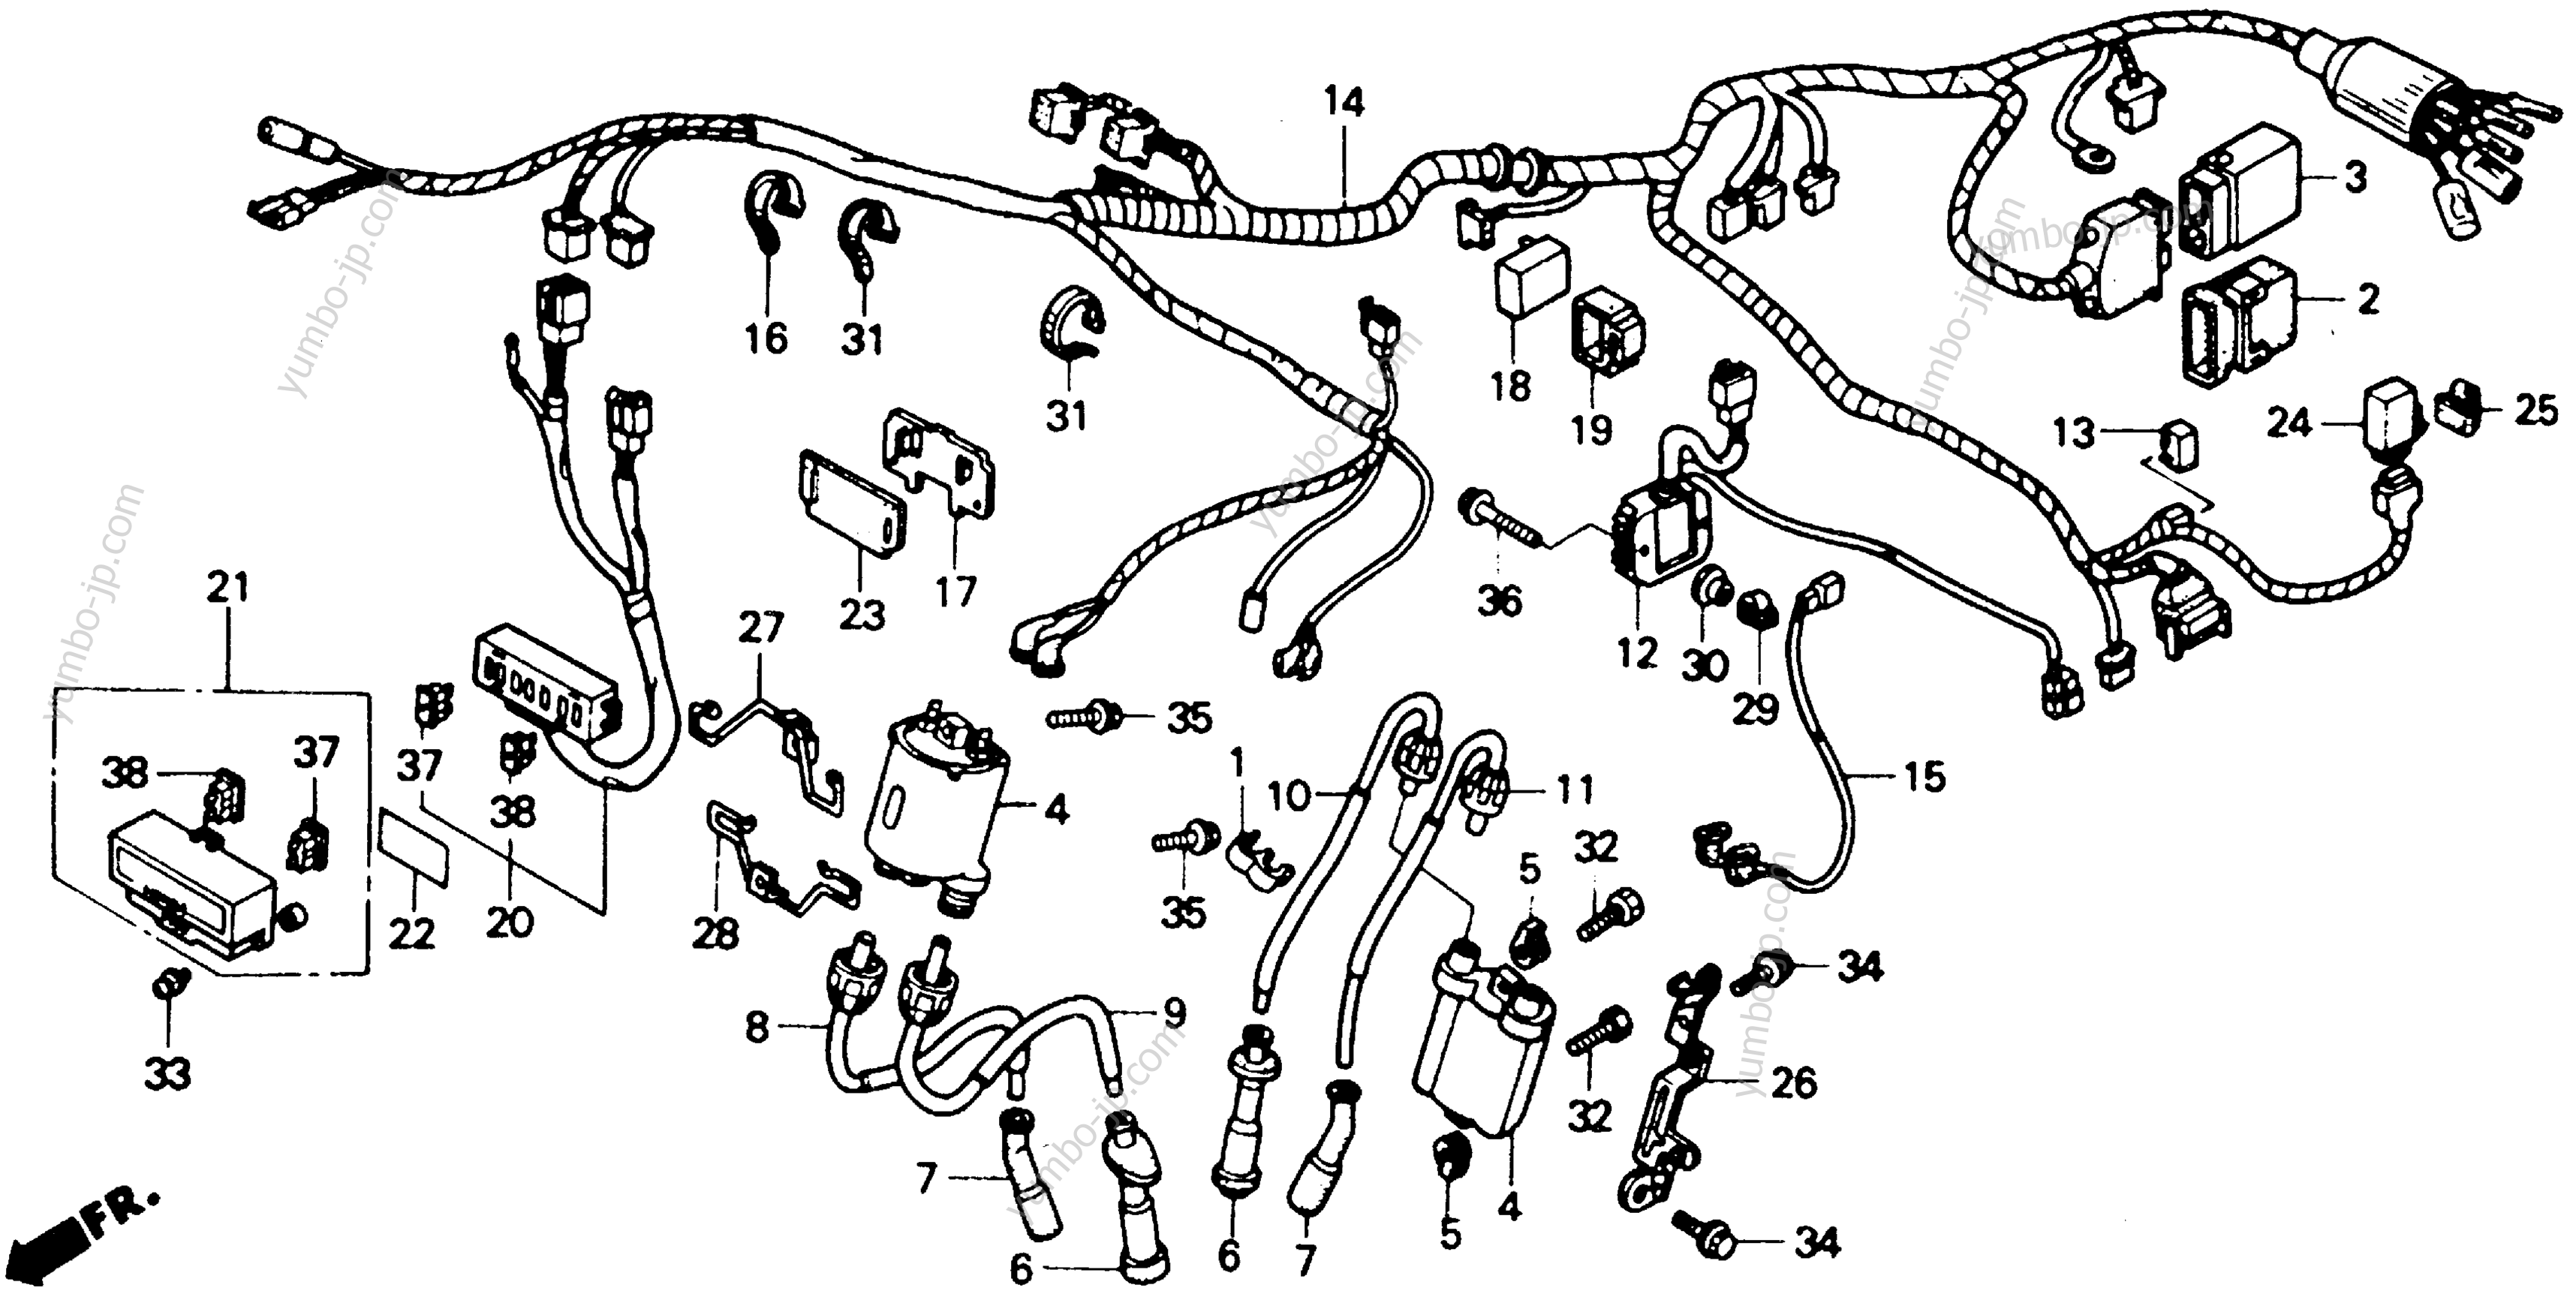 WIRE HARNESS for motorcycles HONDA NT650 A 1988 year